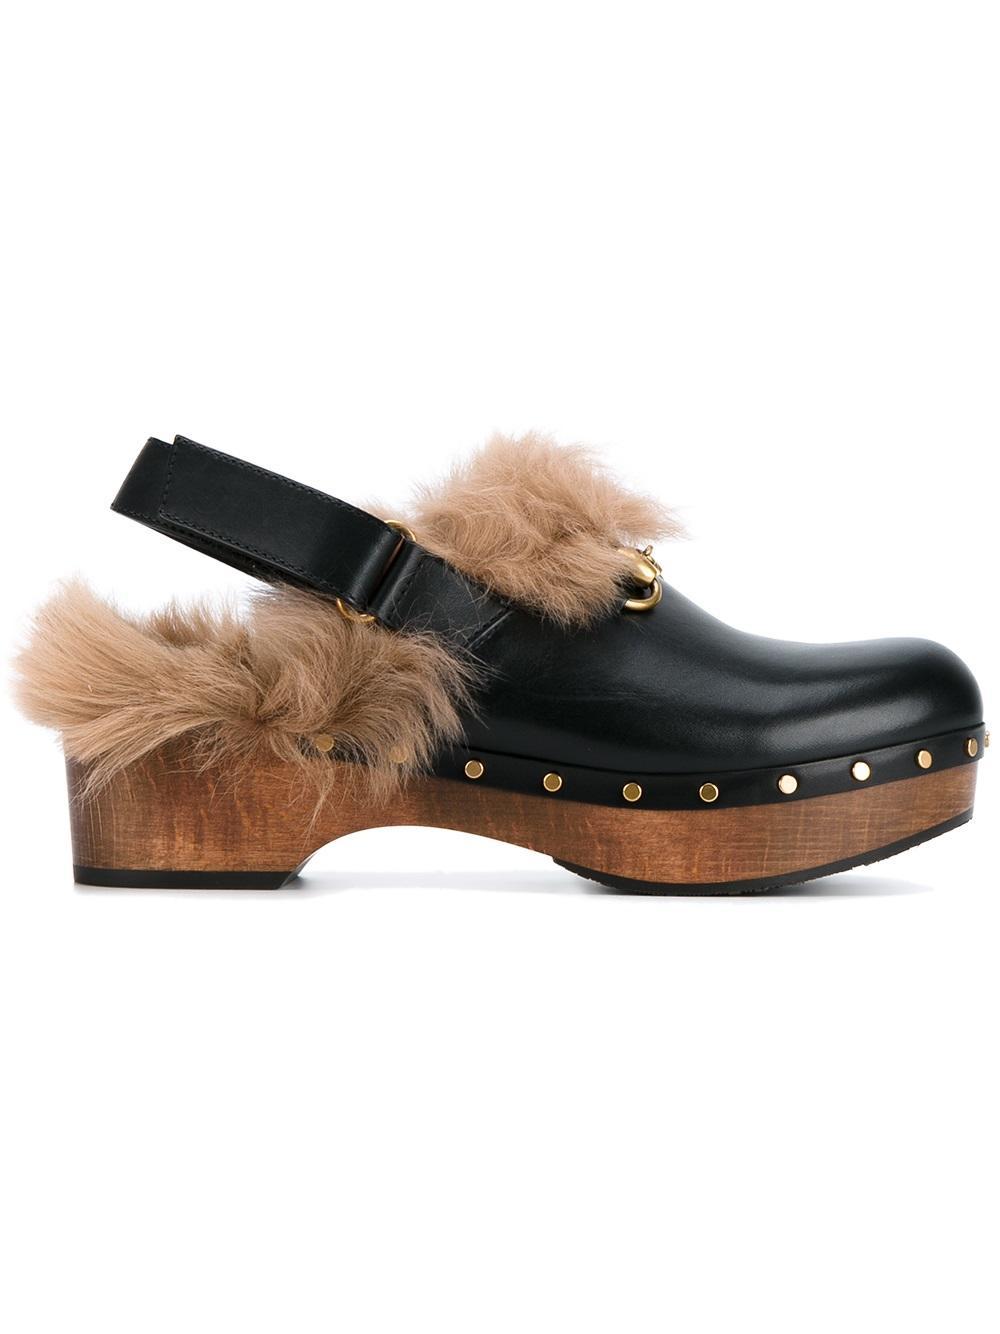 fuzzy lined clogs